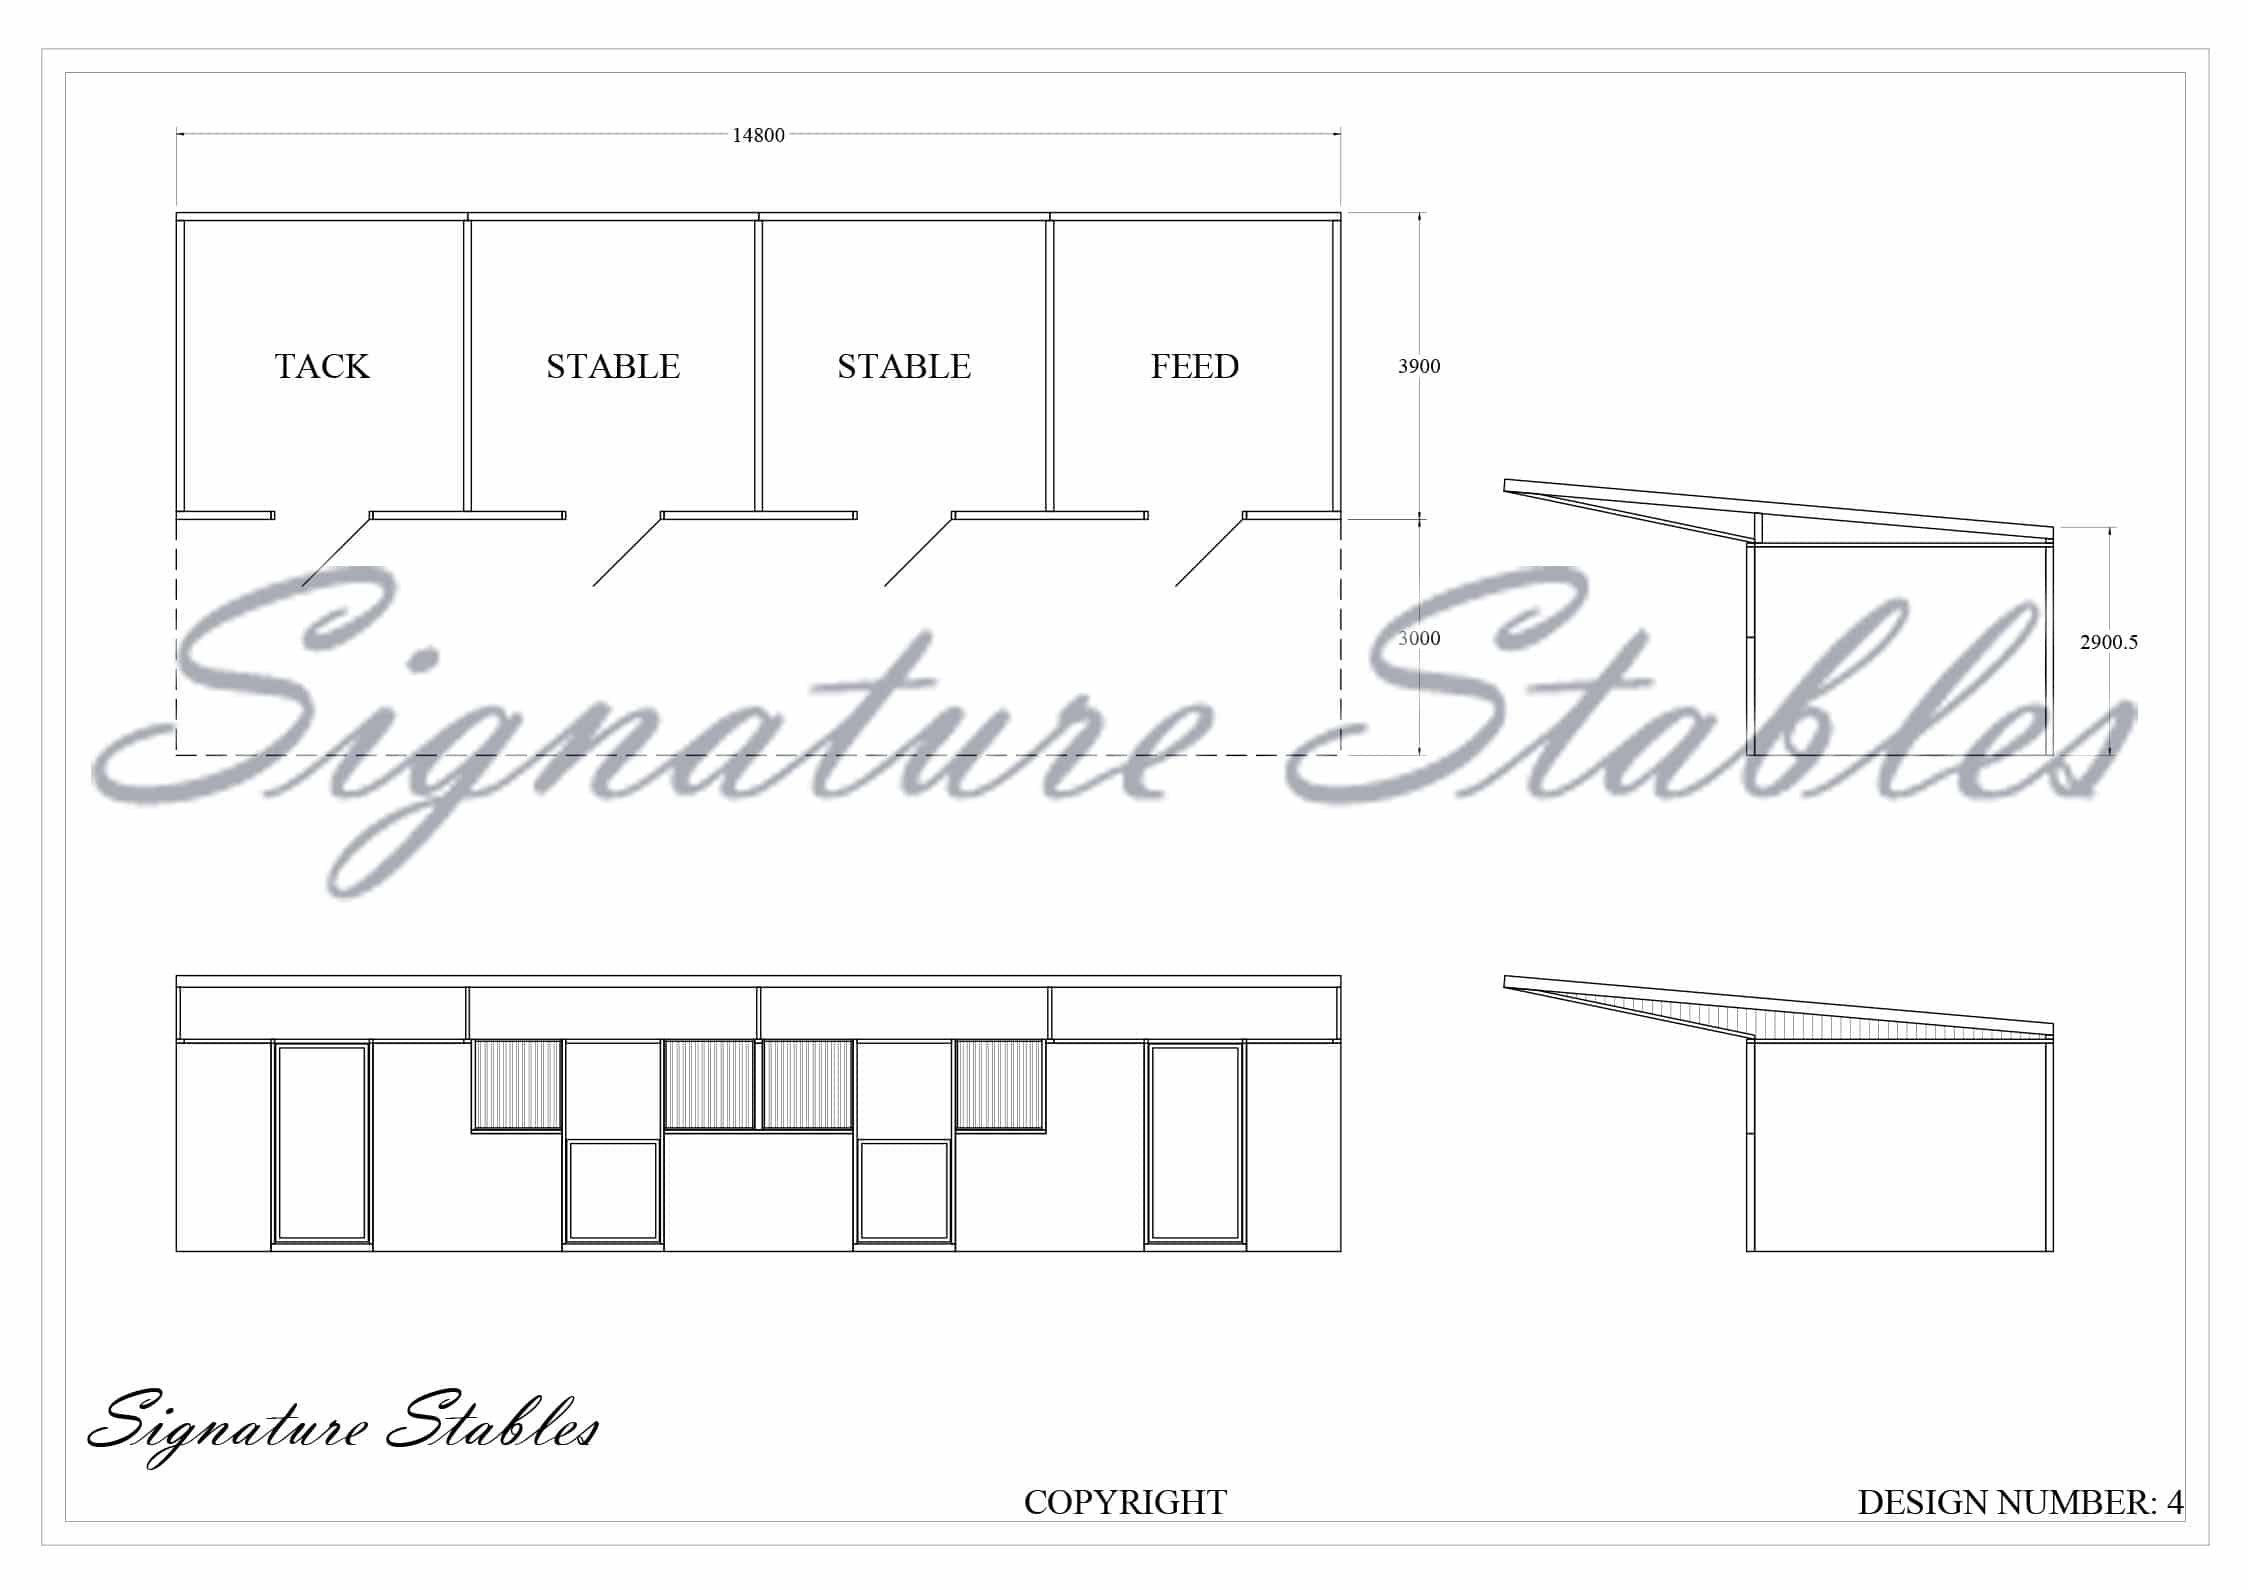 Sample Stable Layouts Gallery - Signature Stables